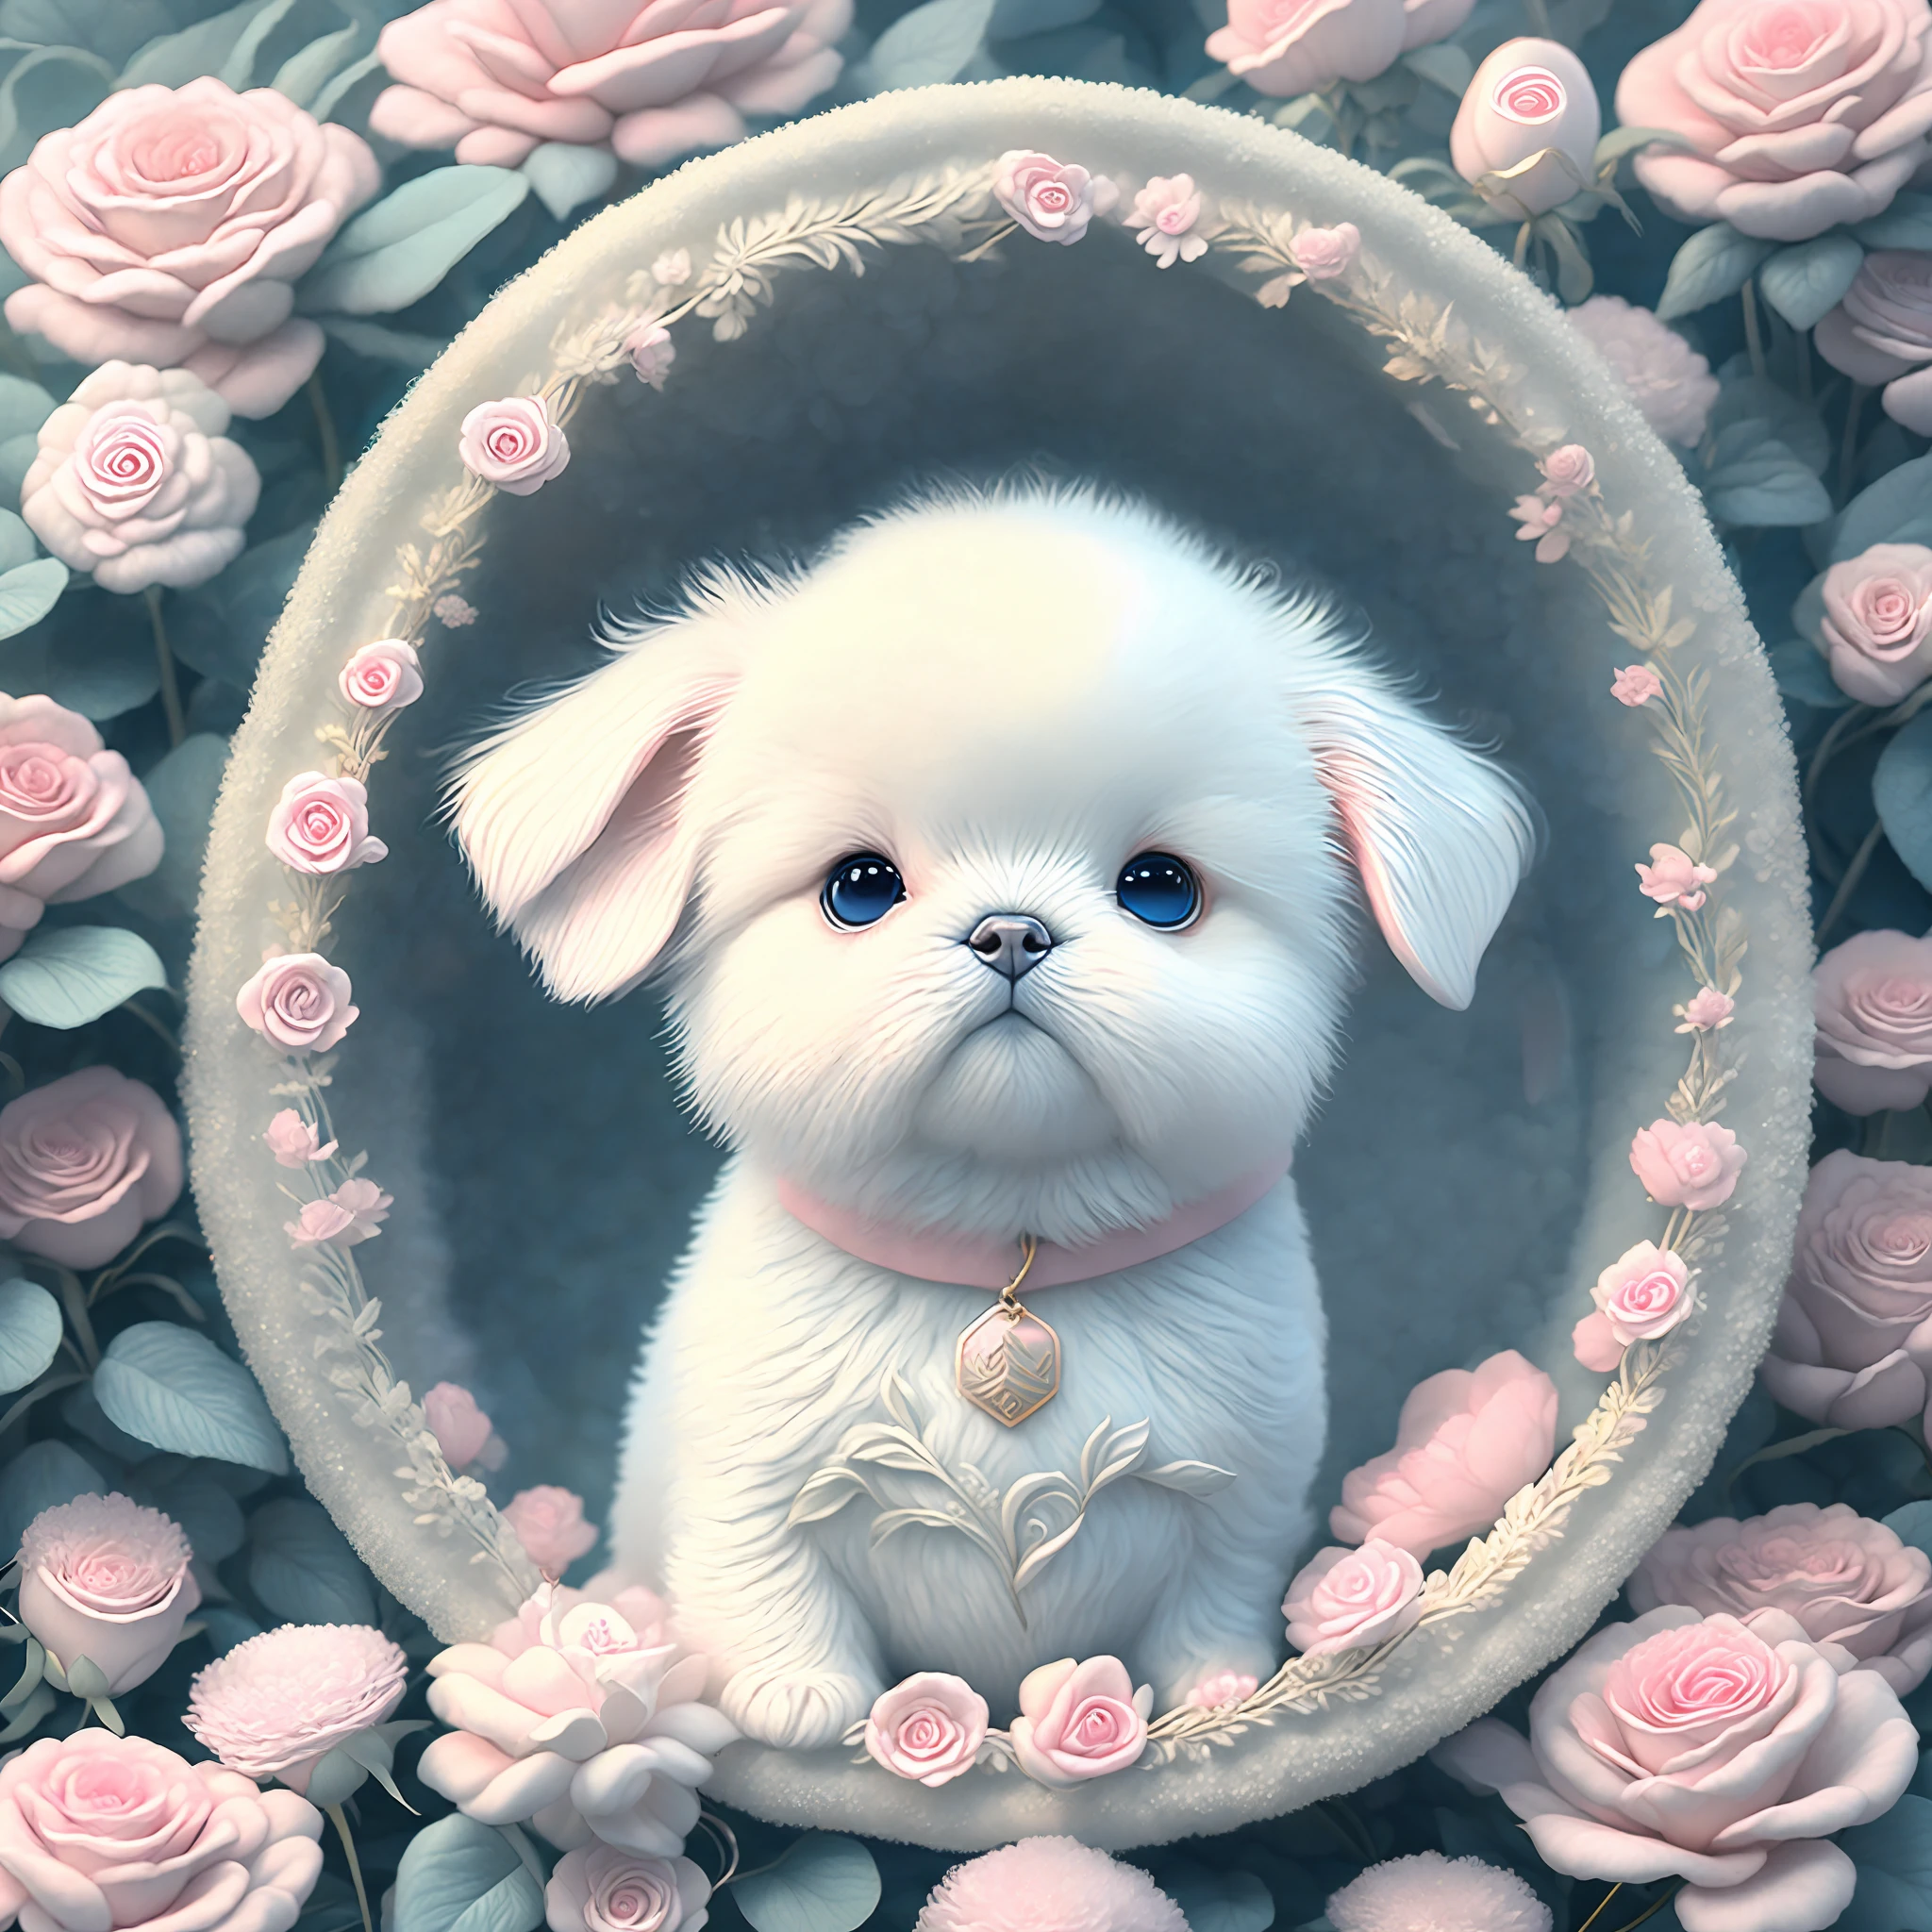 In this ultra-detailed CG art, the adorable puppy surrounded by ethereal roses, best quality, high resolution, intricate details, fantasy, cute animals